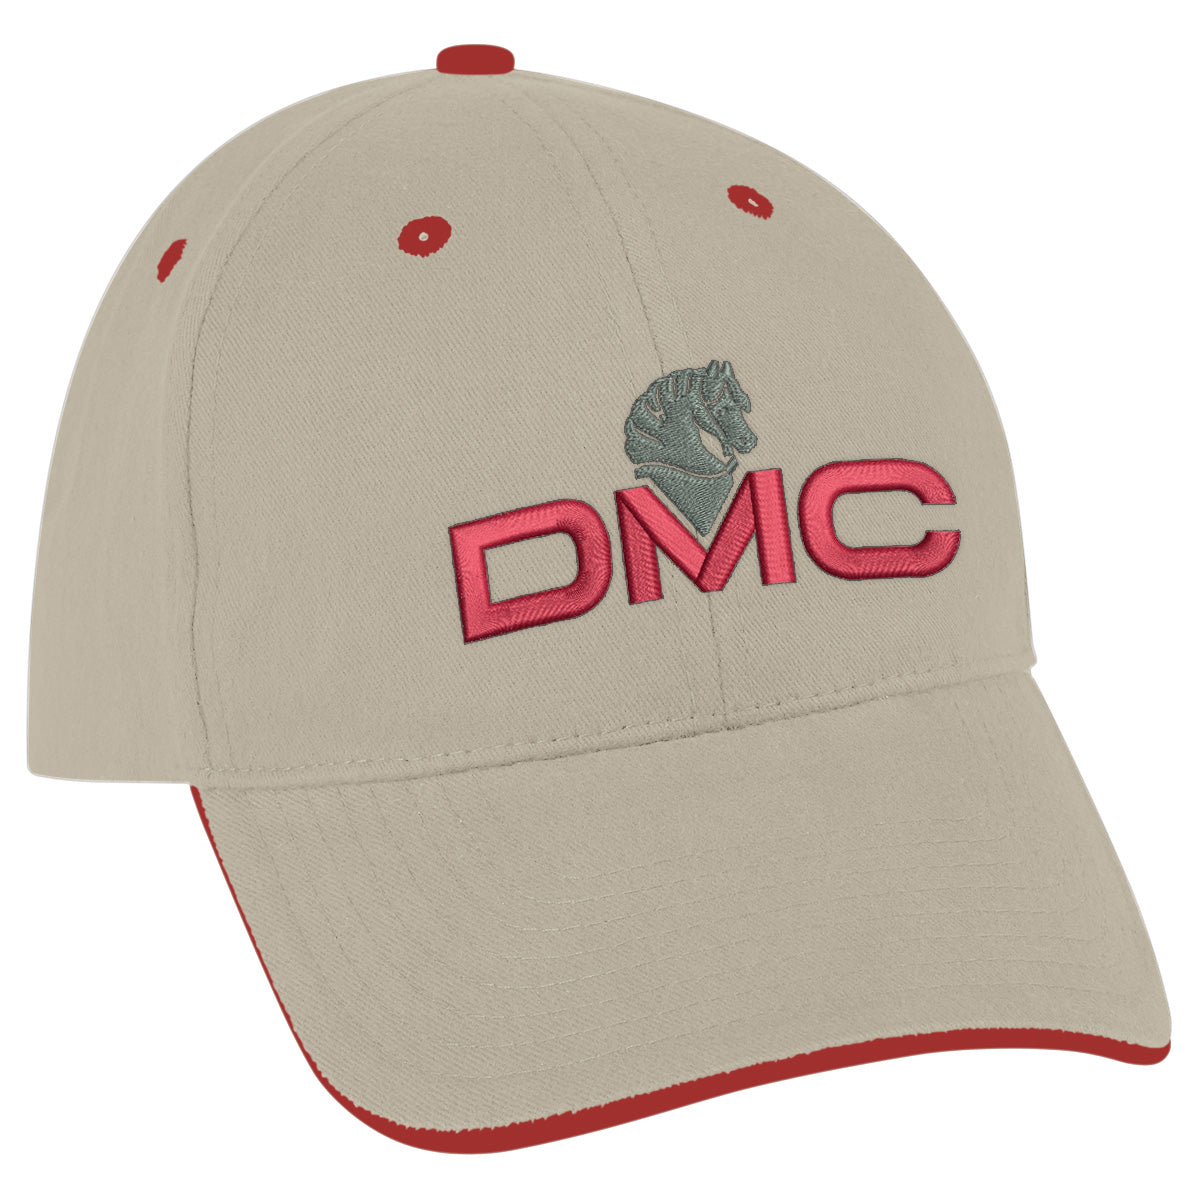 Elite Cap Hats Hit Promo Khaki with Red Trim Embroidered 